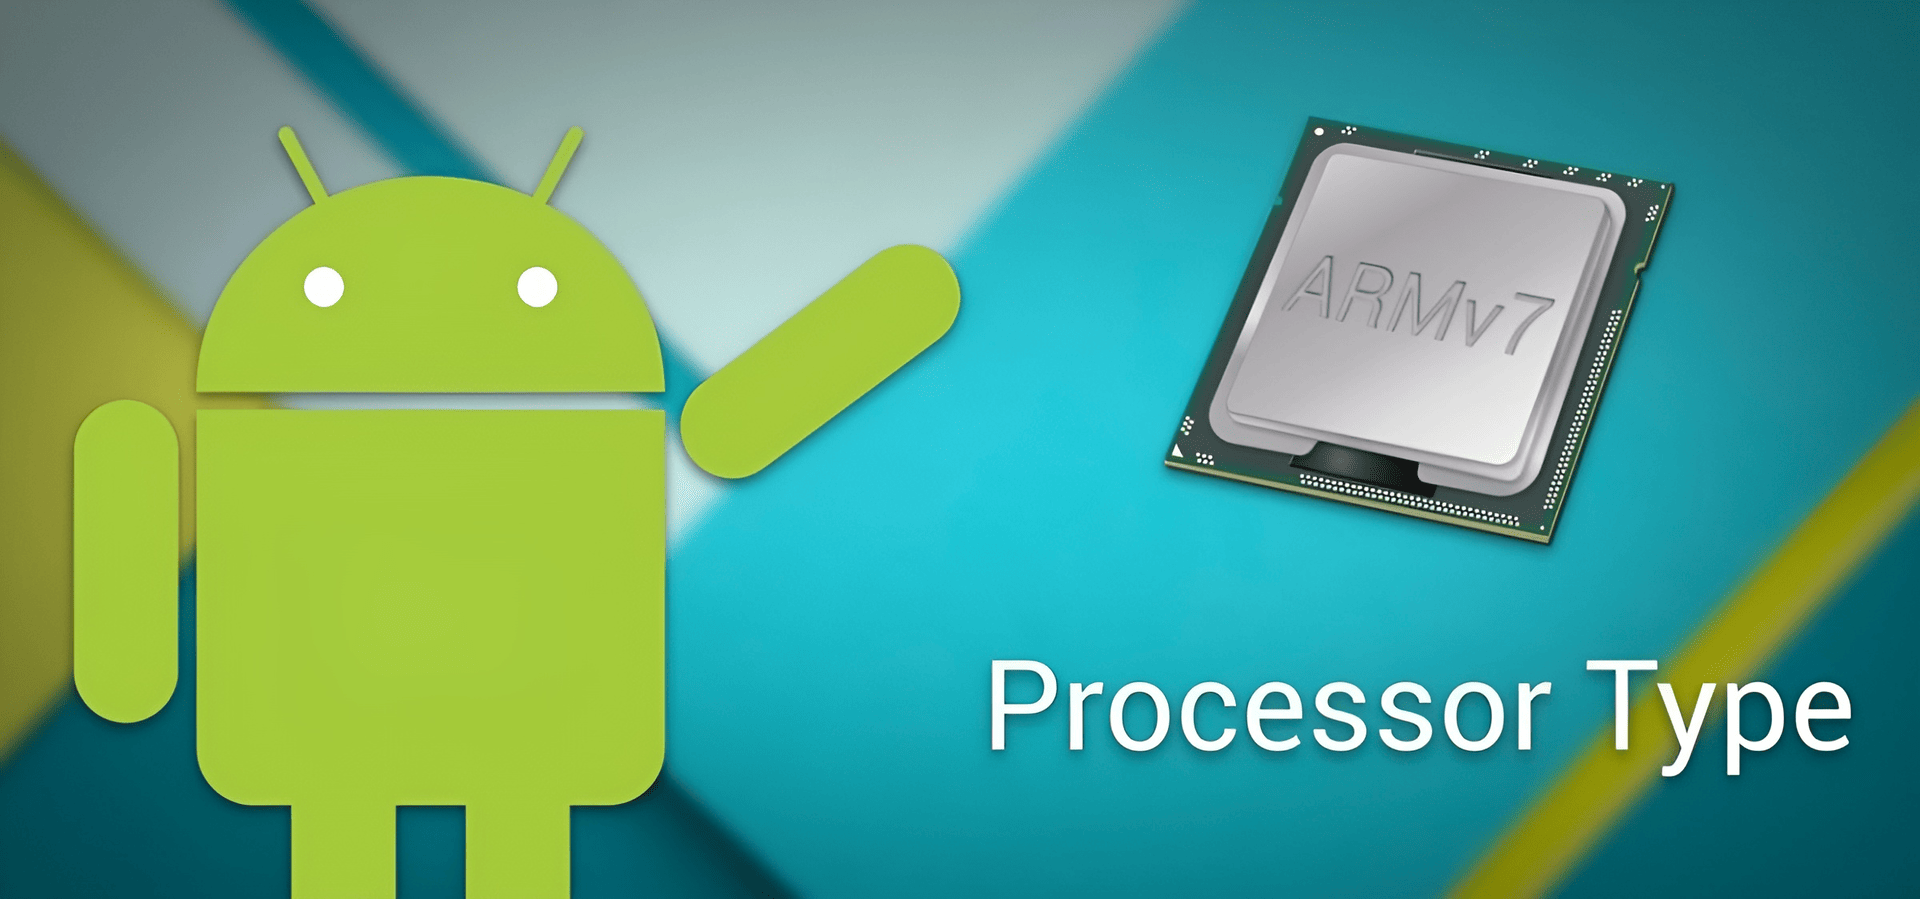 Android and ARM